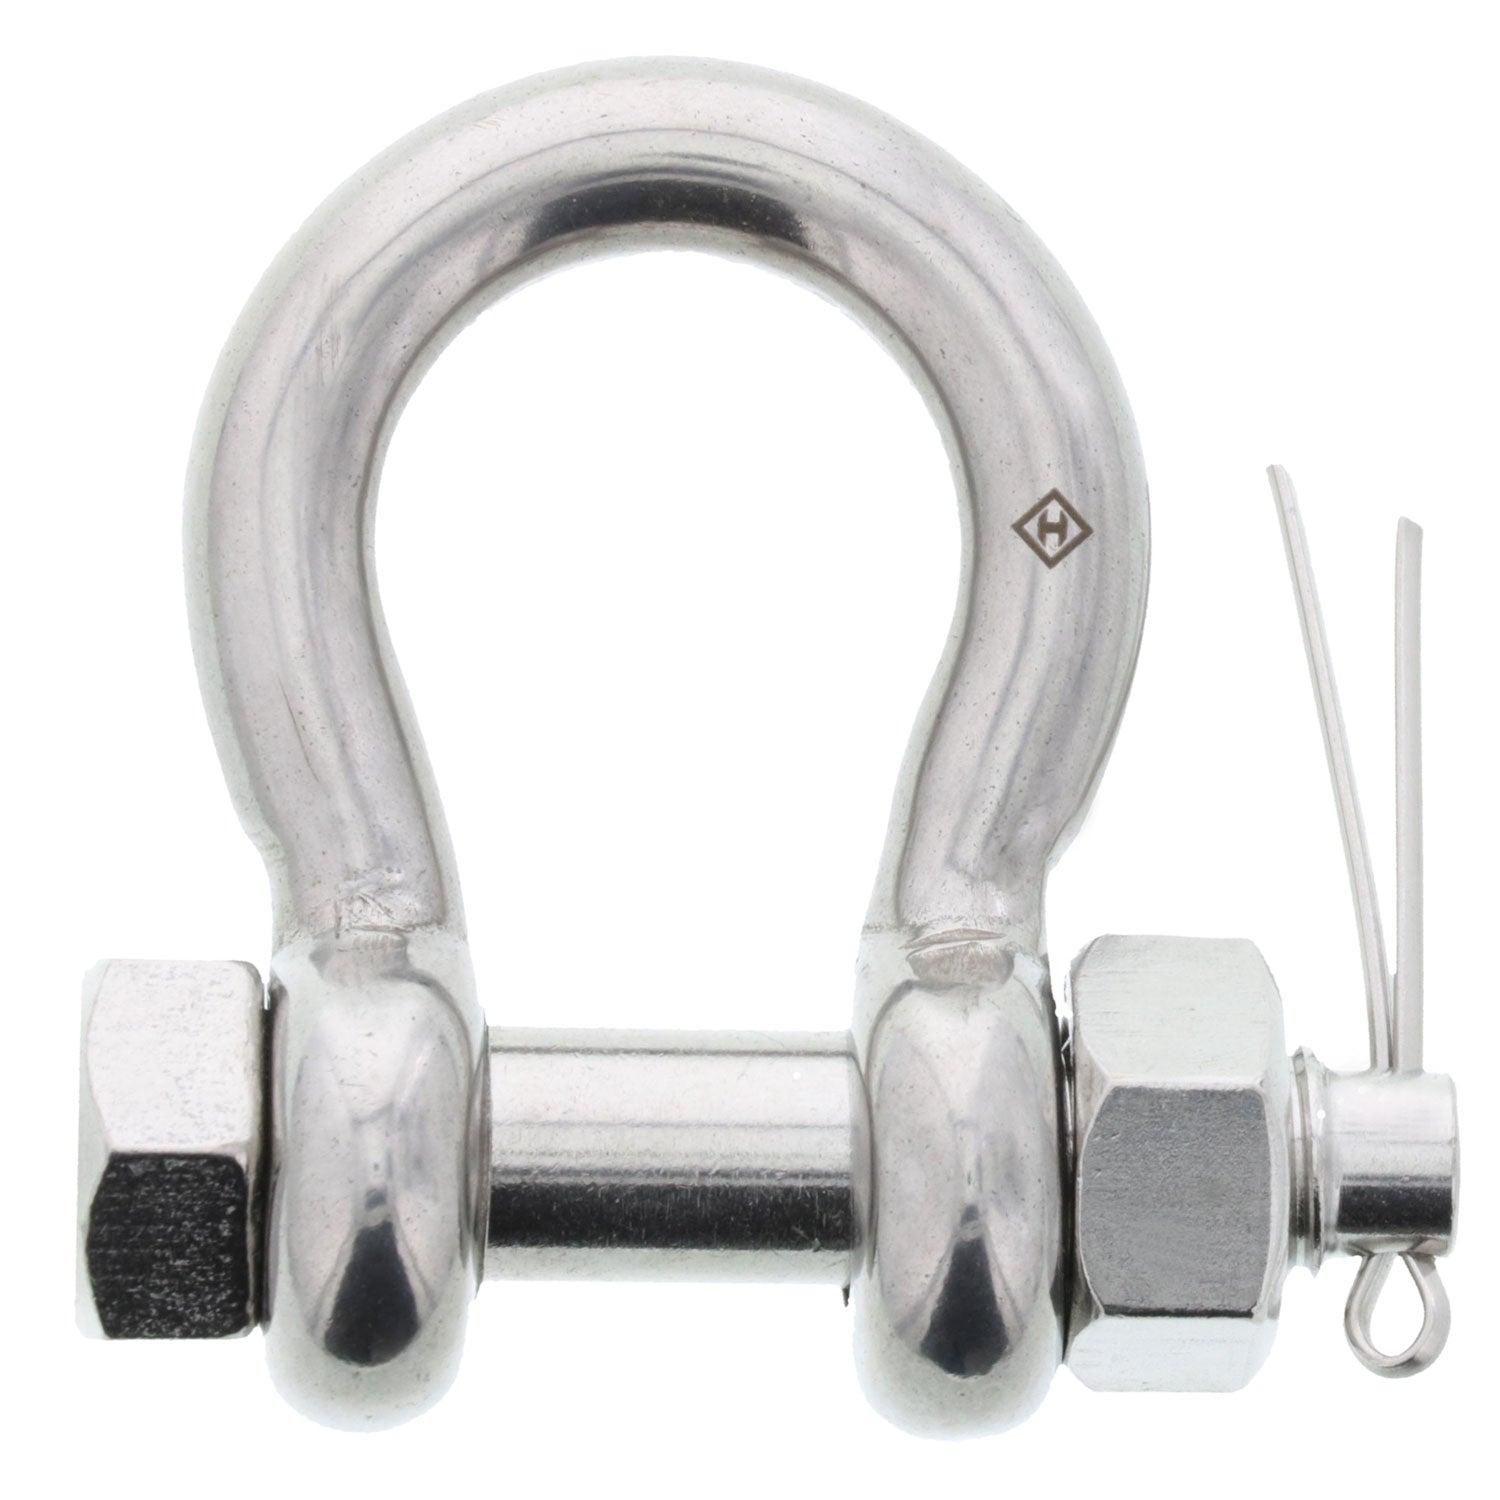 3/8 in., 3/4 ton, Type 316 Stainless Steel Bolt-Type Anchor Shackle